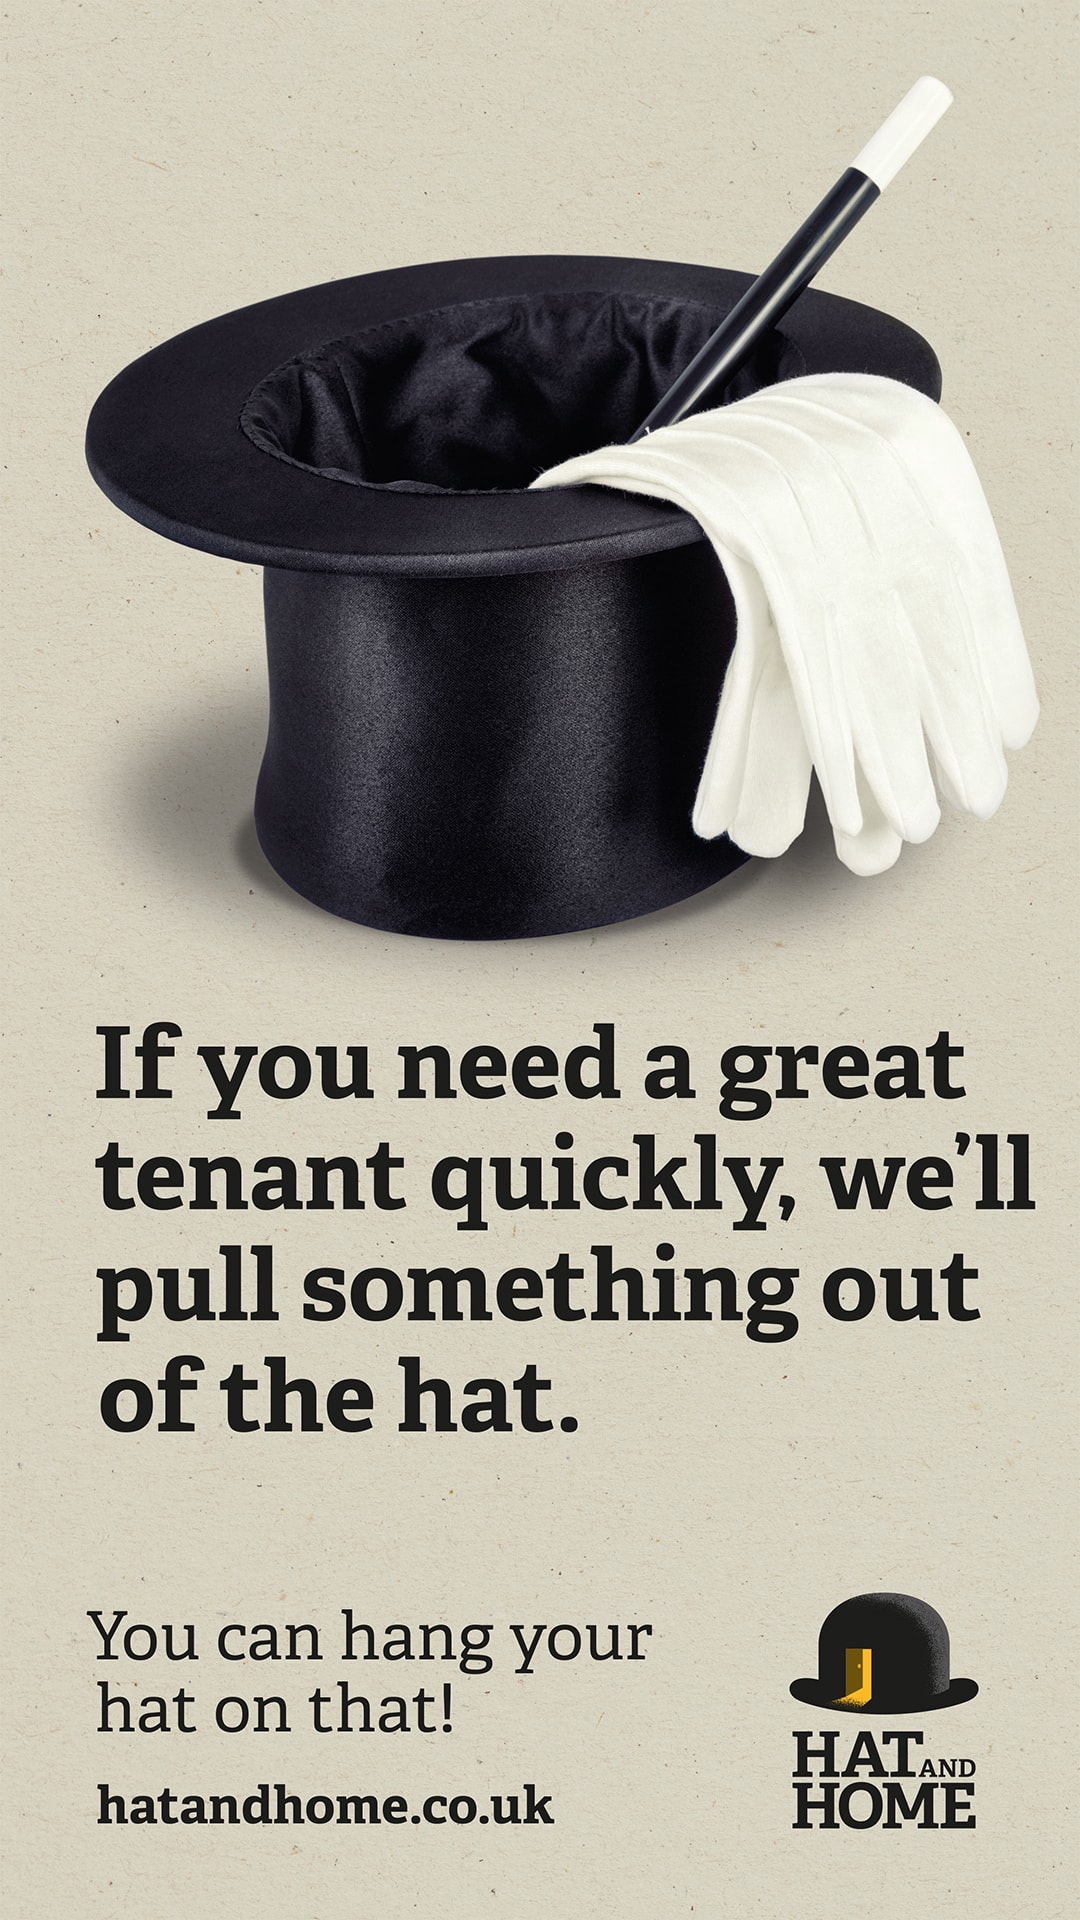 You can hang your hat on that...